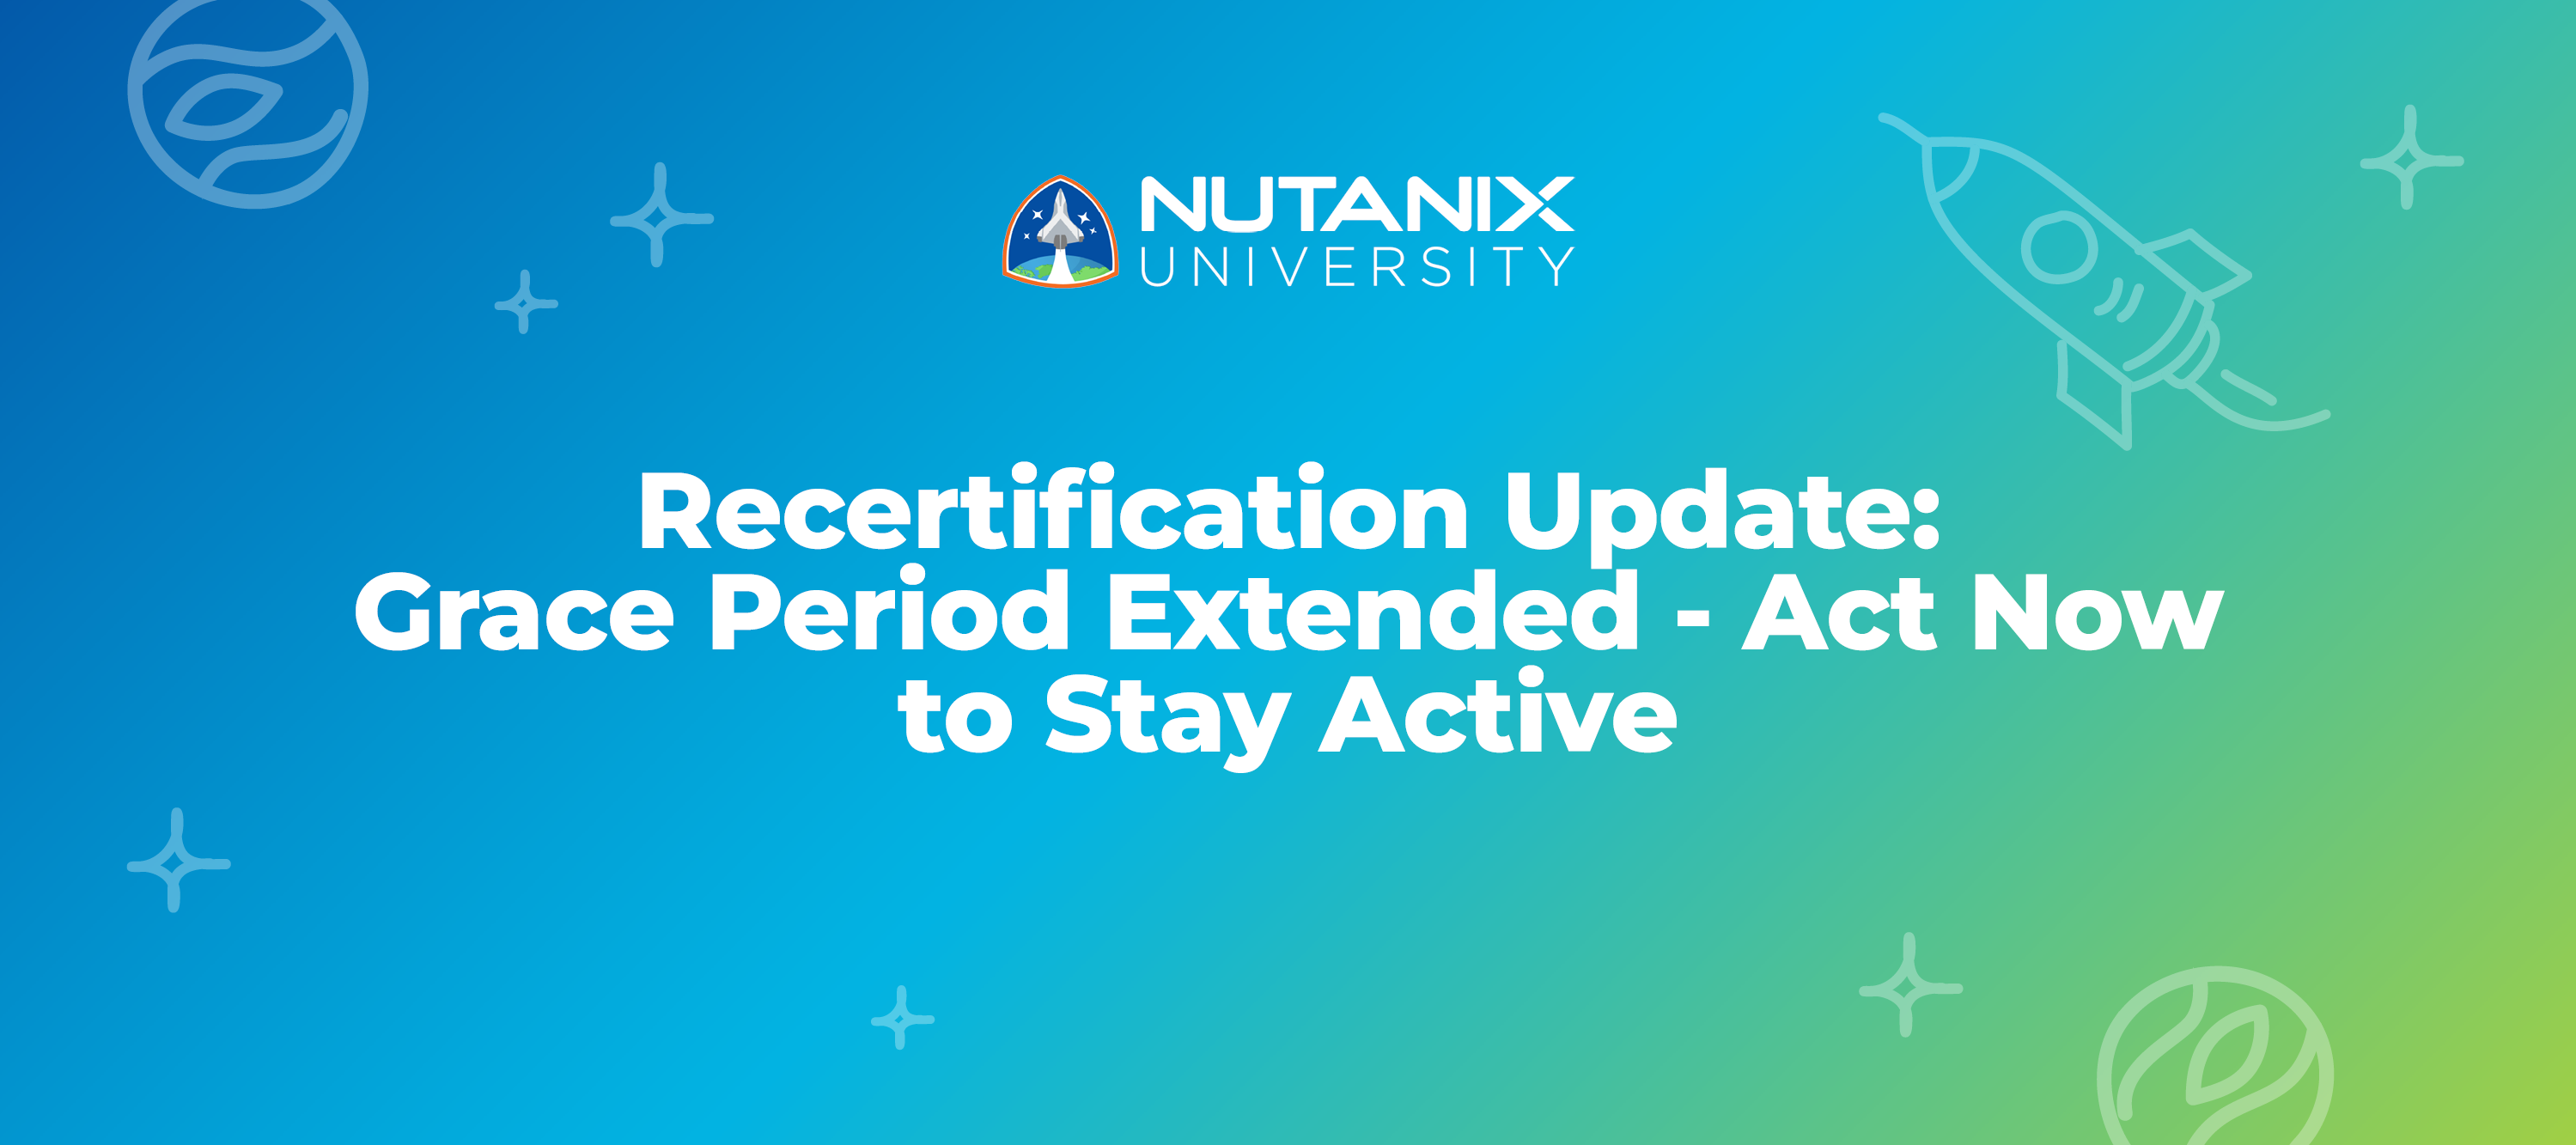 Recertification Update: Grace Period Extended - Act Now to Stay Active